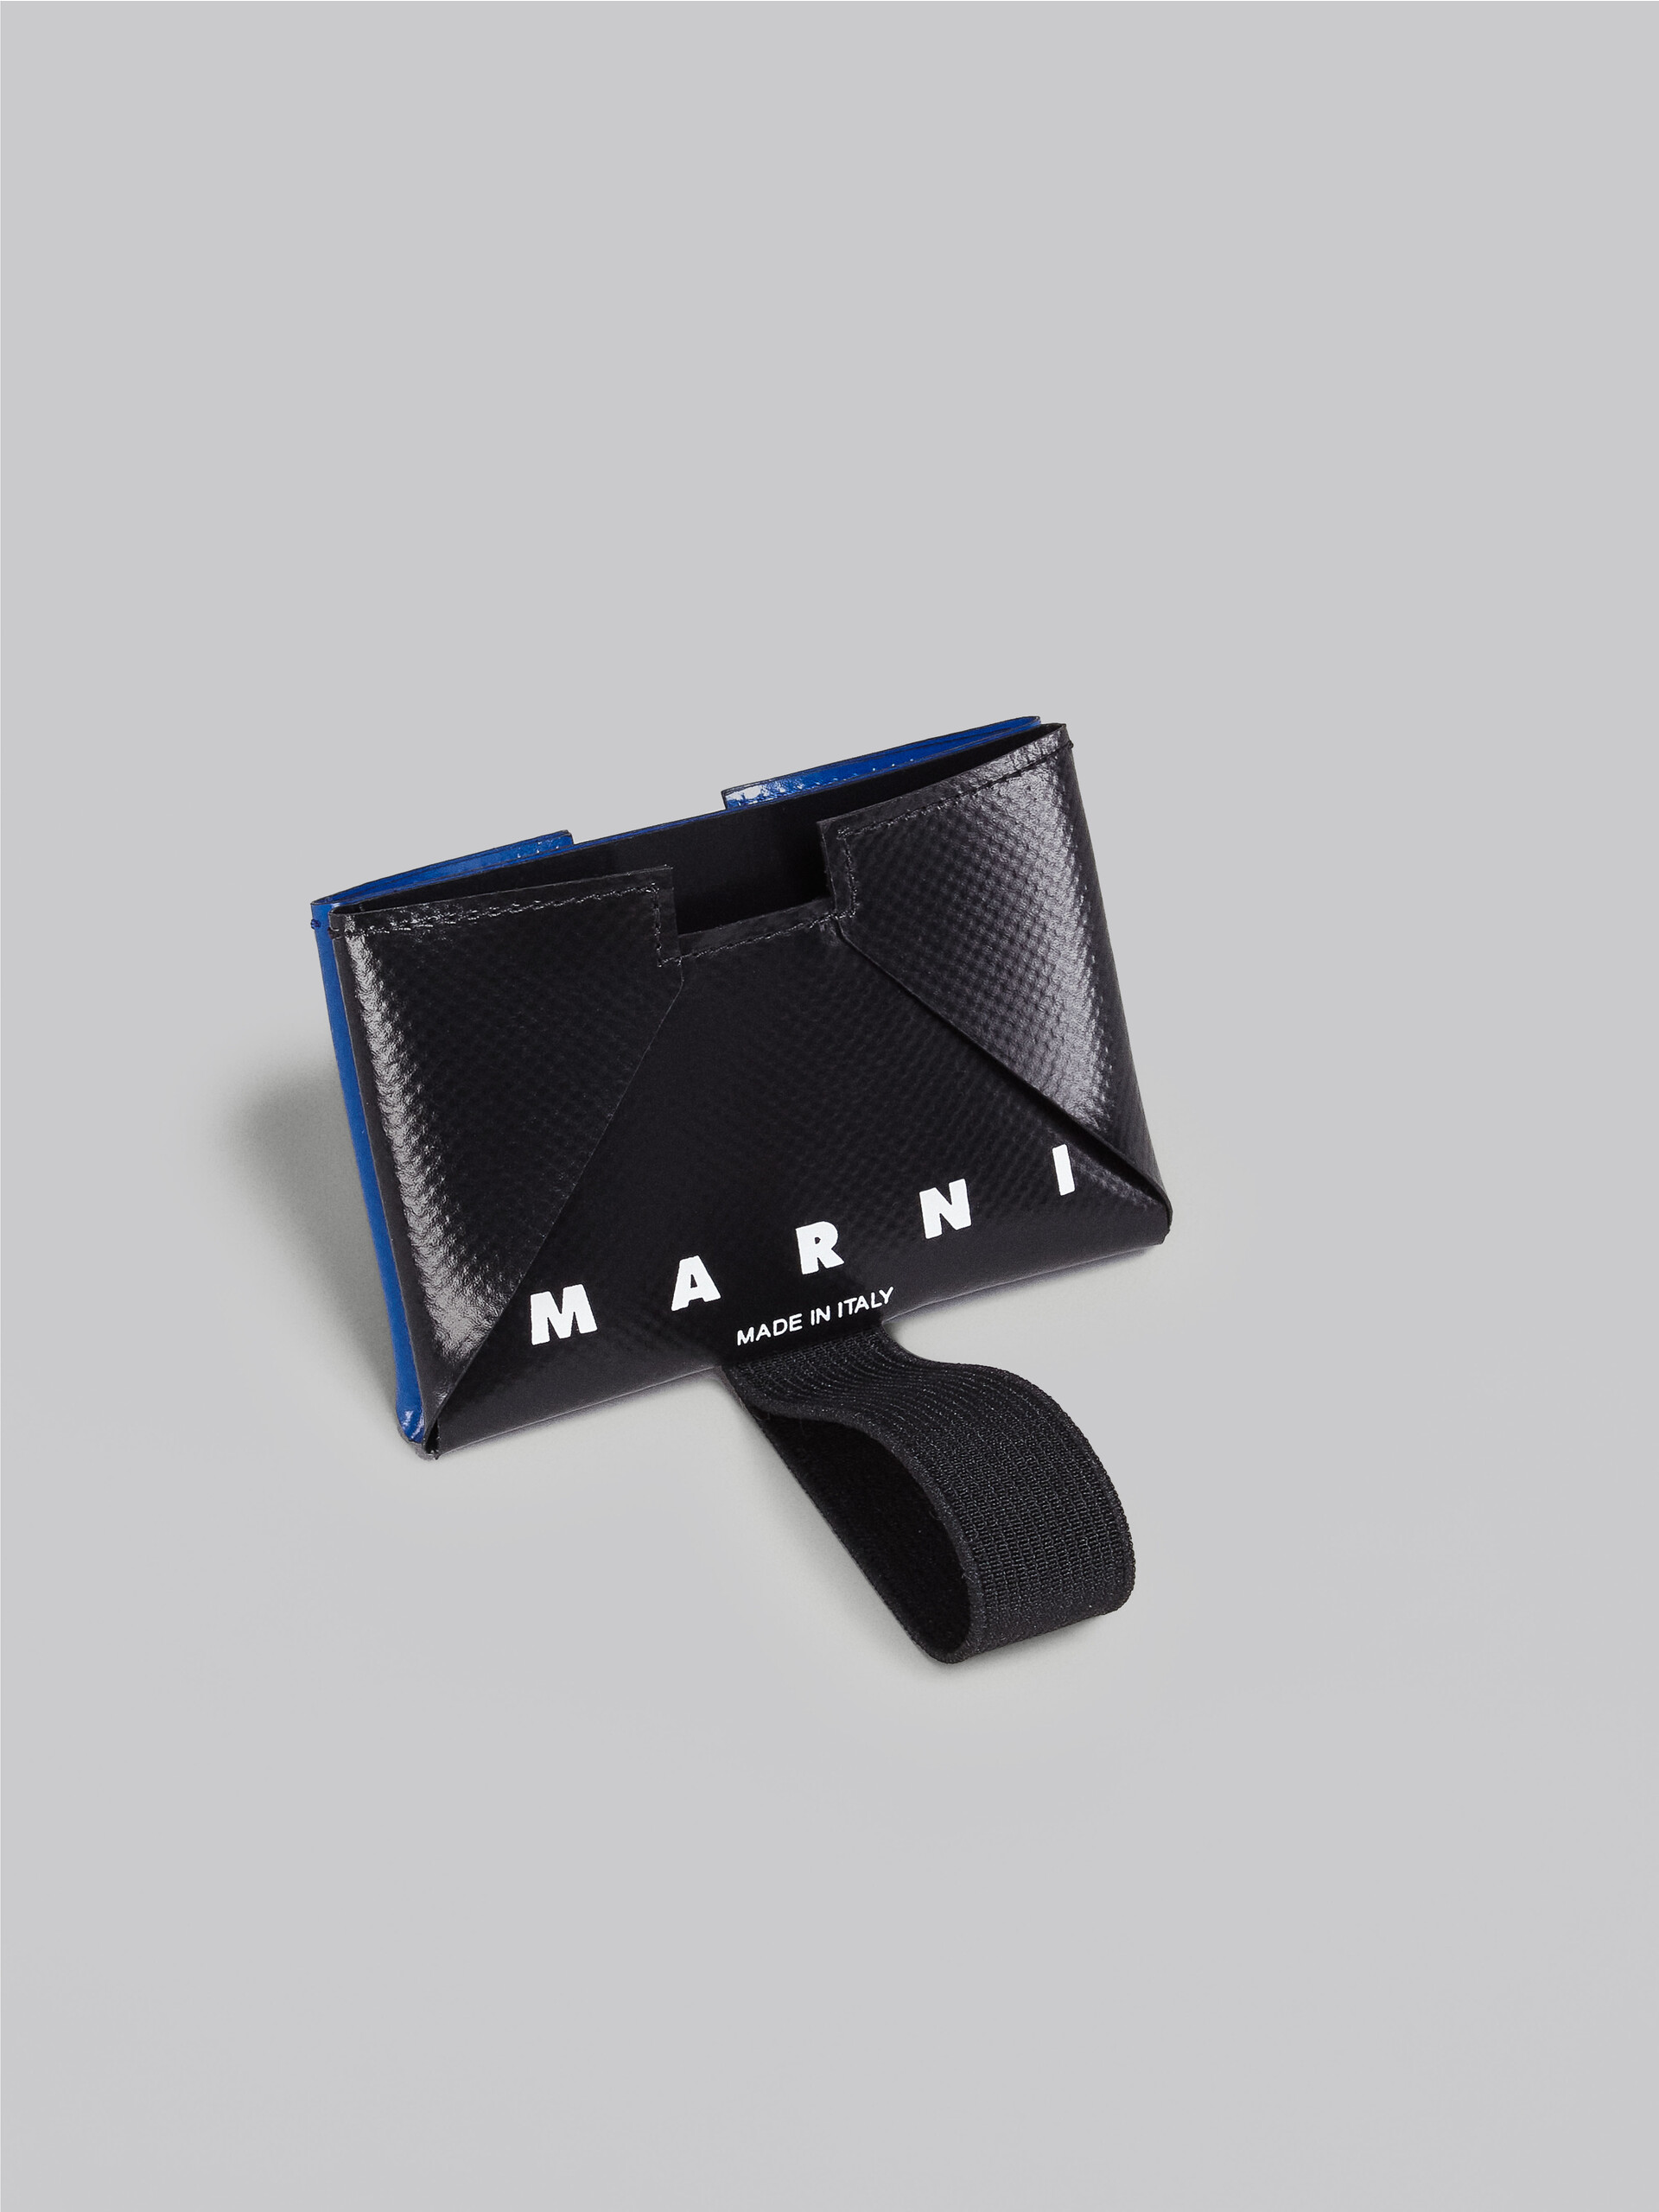 Black and blue card case - Wallets - Image 5